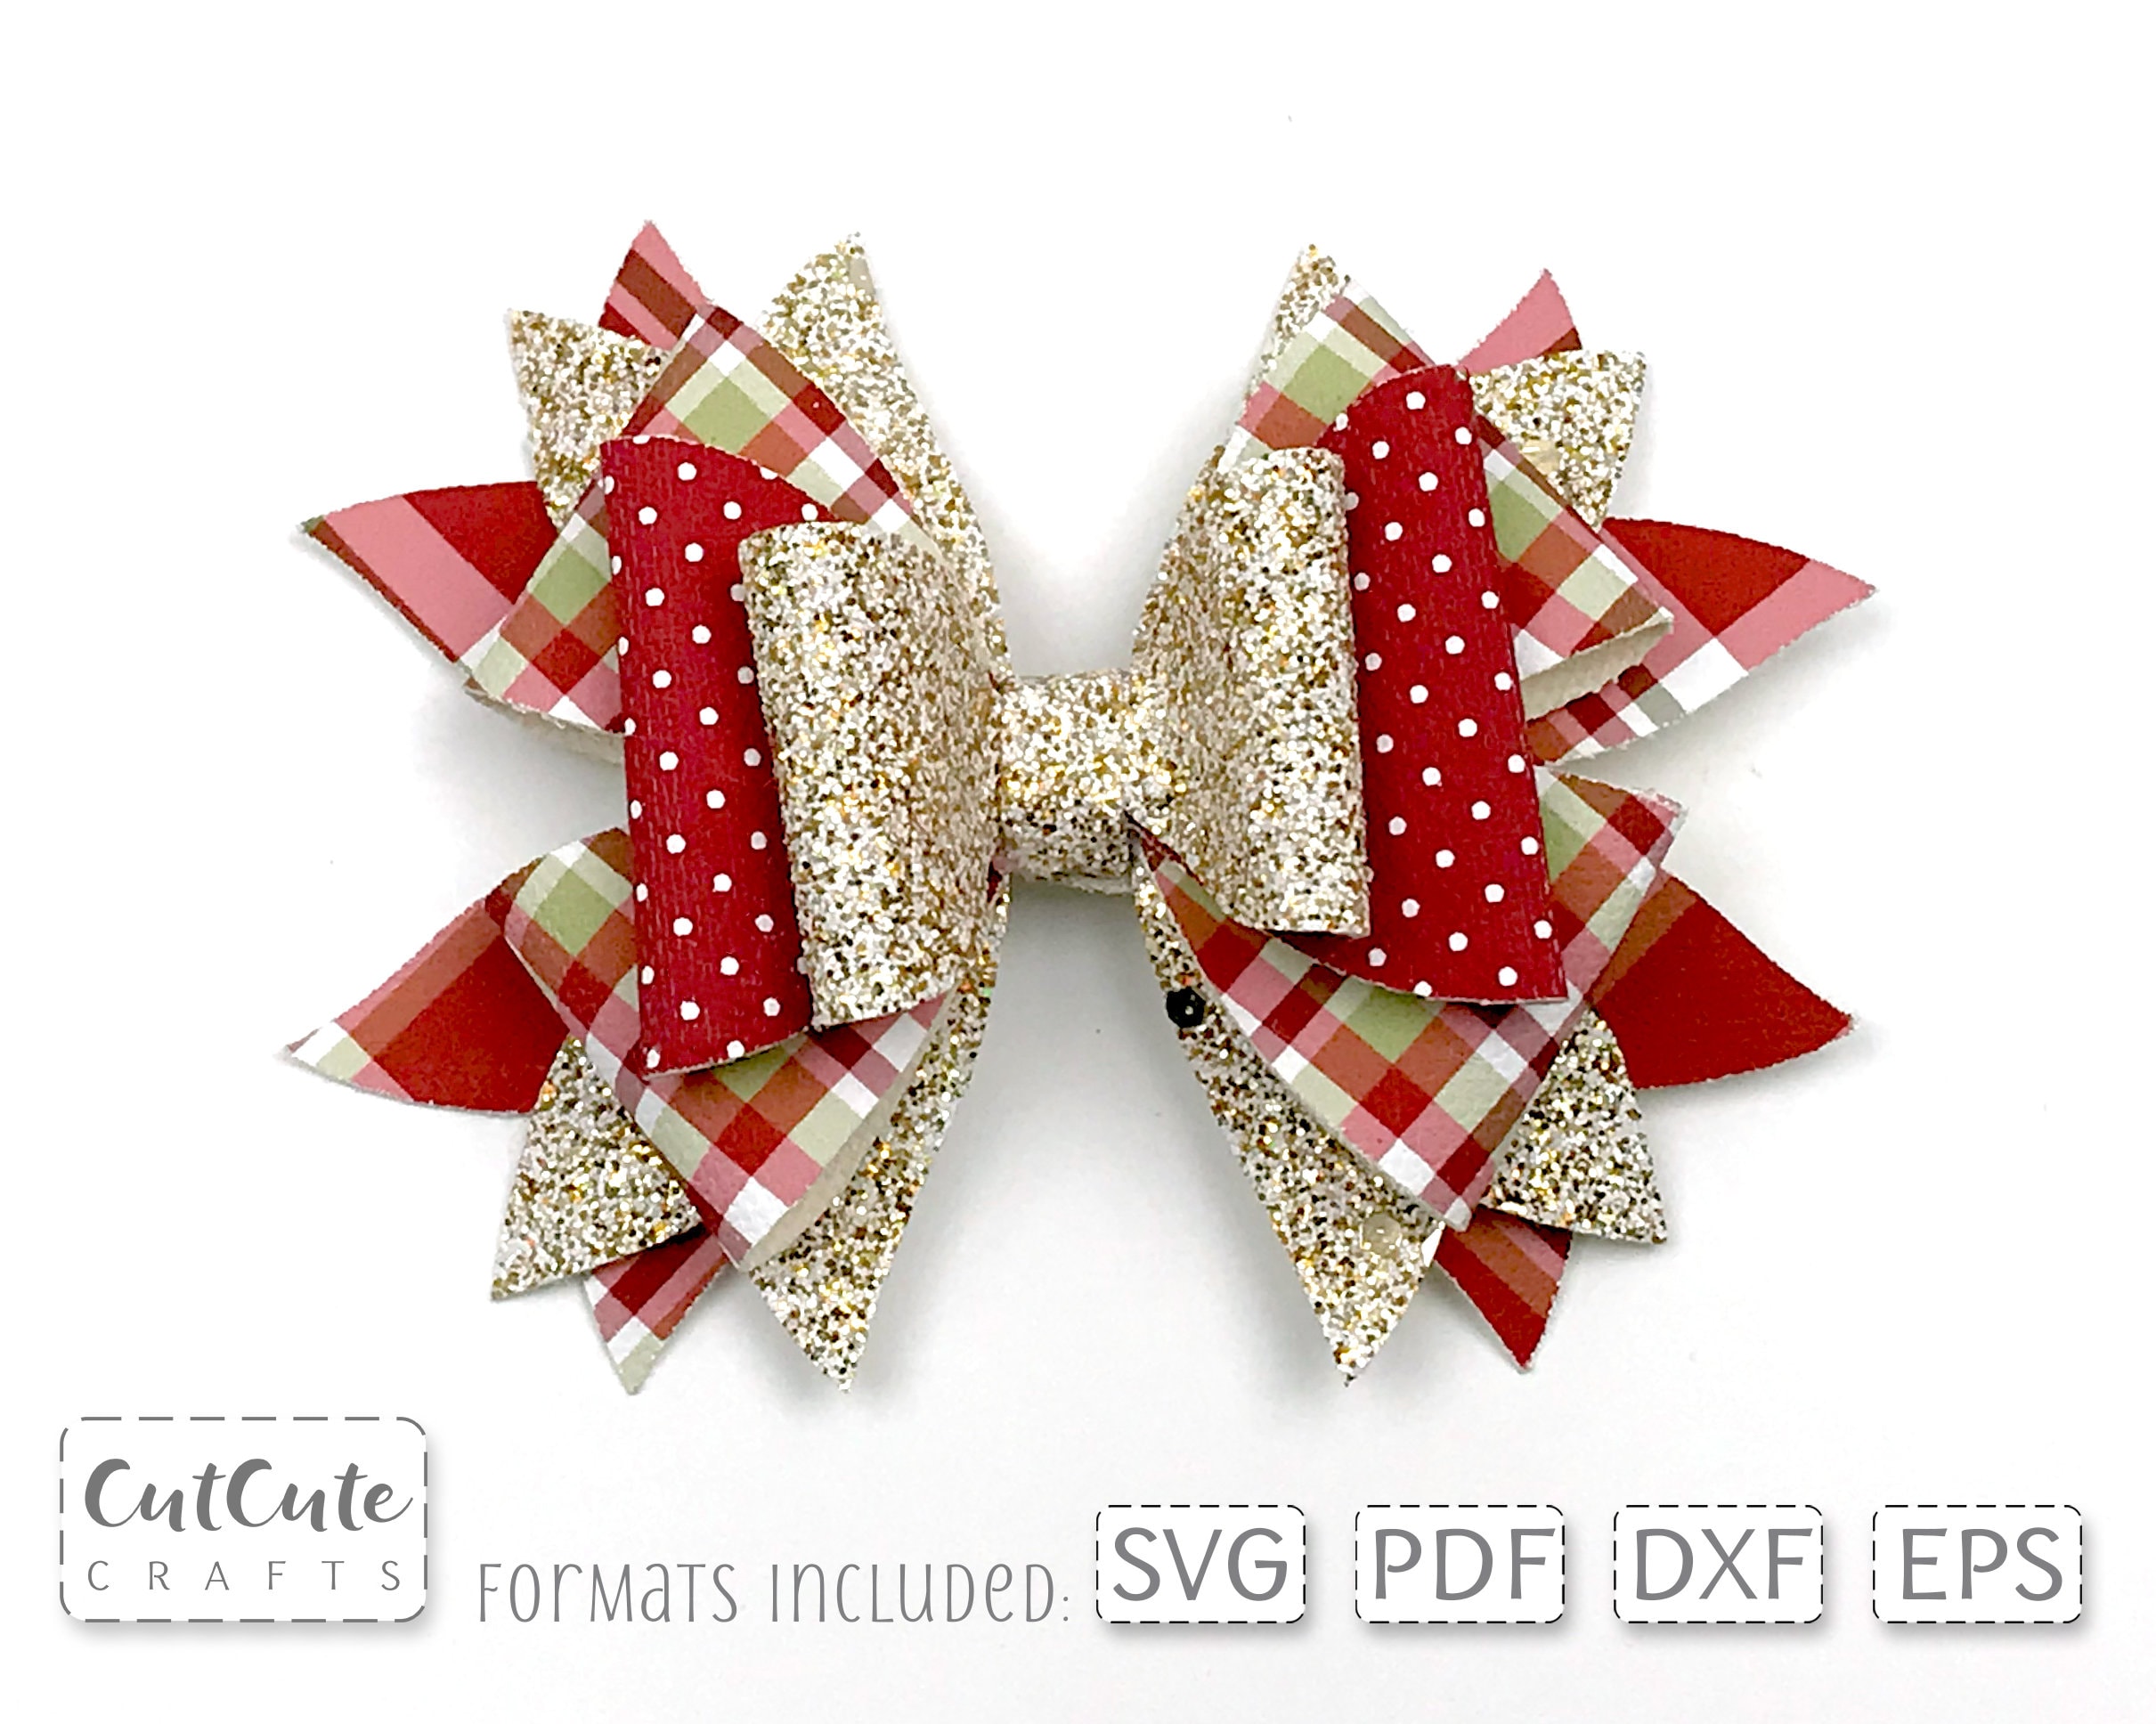 Christmas Clipart of Red Bow and Gift Wrapping Ribbons, Vector, Ai Eps Png  Jpg and Pdf Files Included, Digital Files Instant Download. 